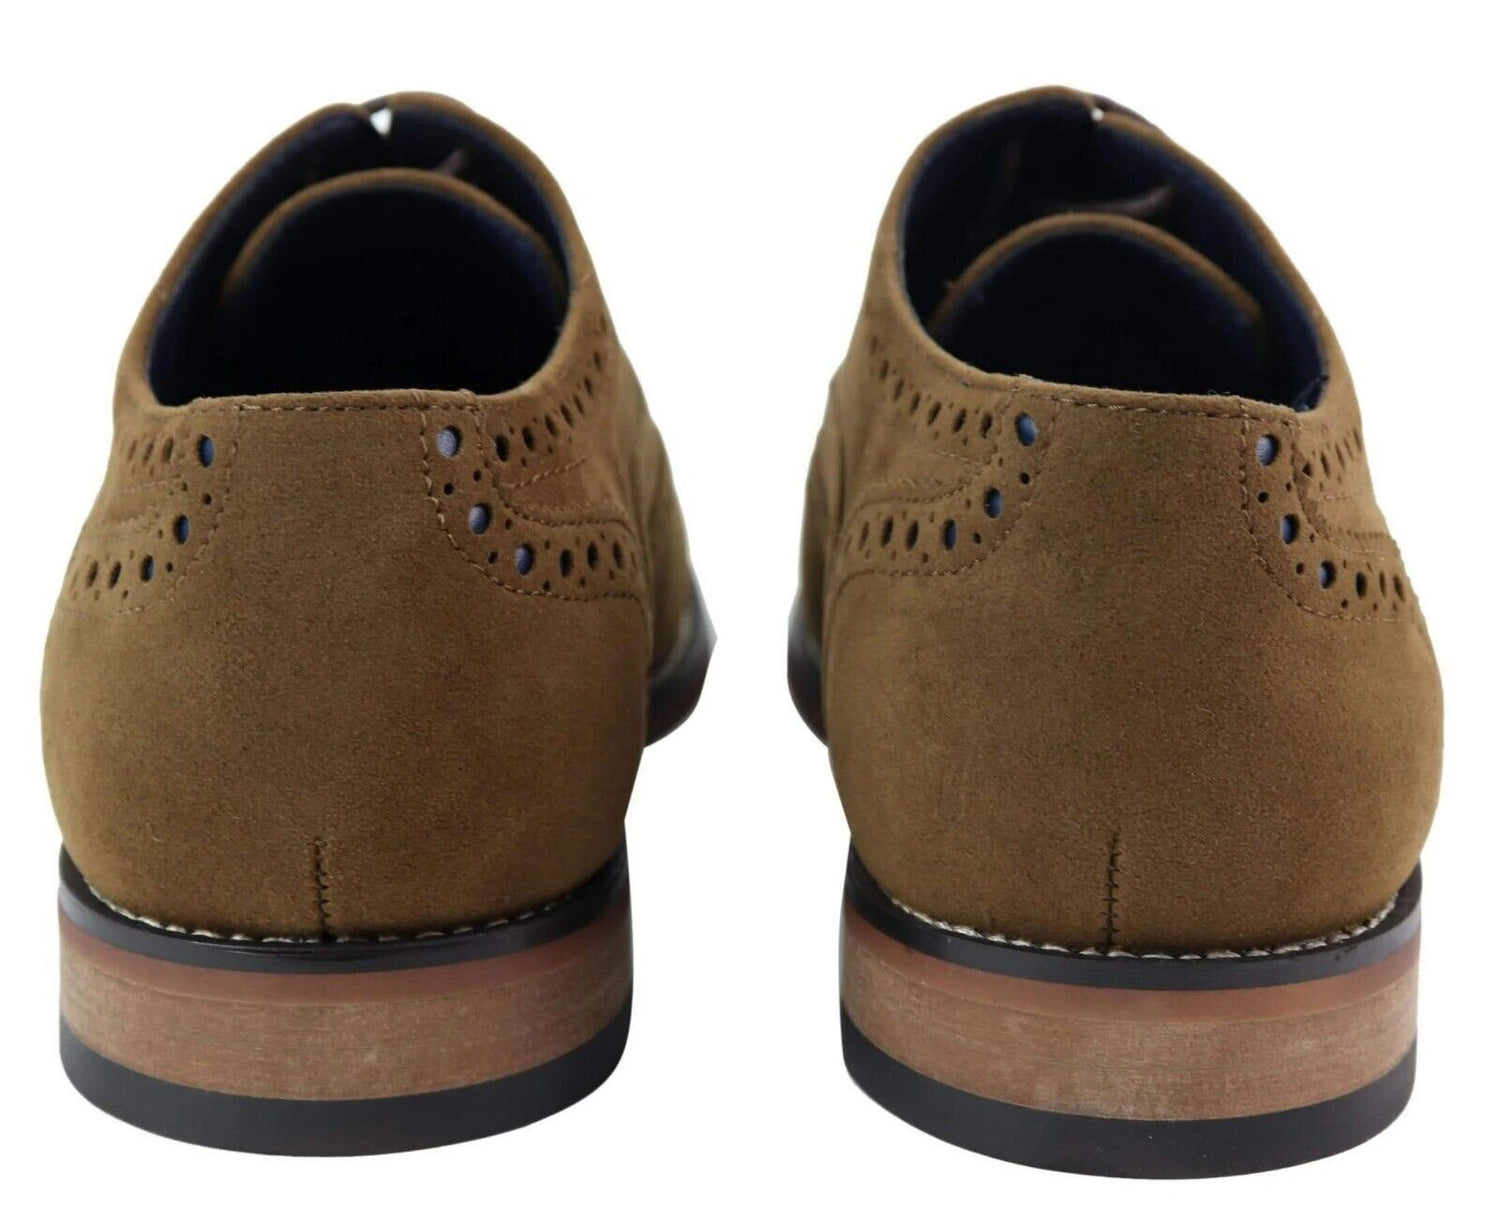 Mens Classic Oxford Brogue Shoes in Tan/Navy Suede